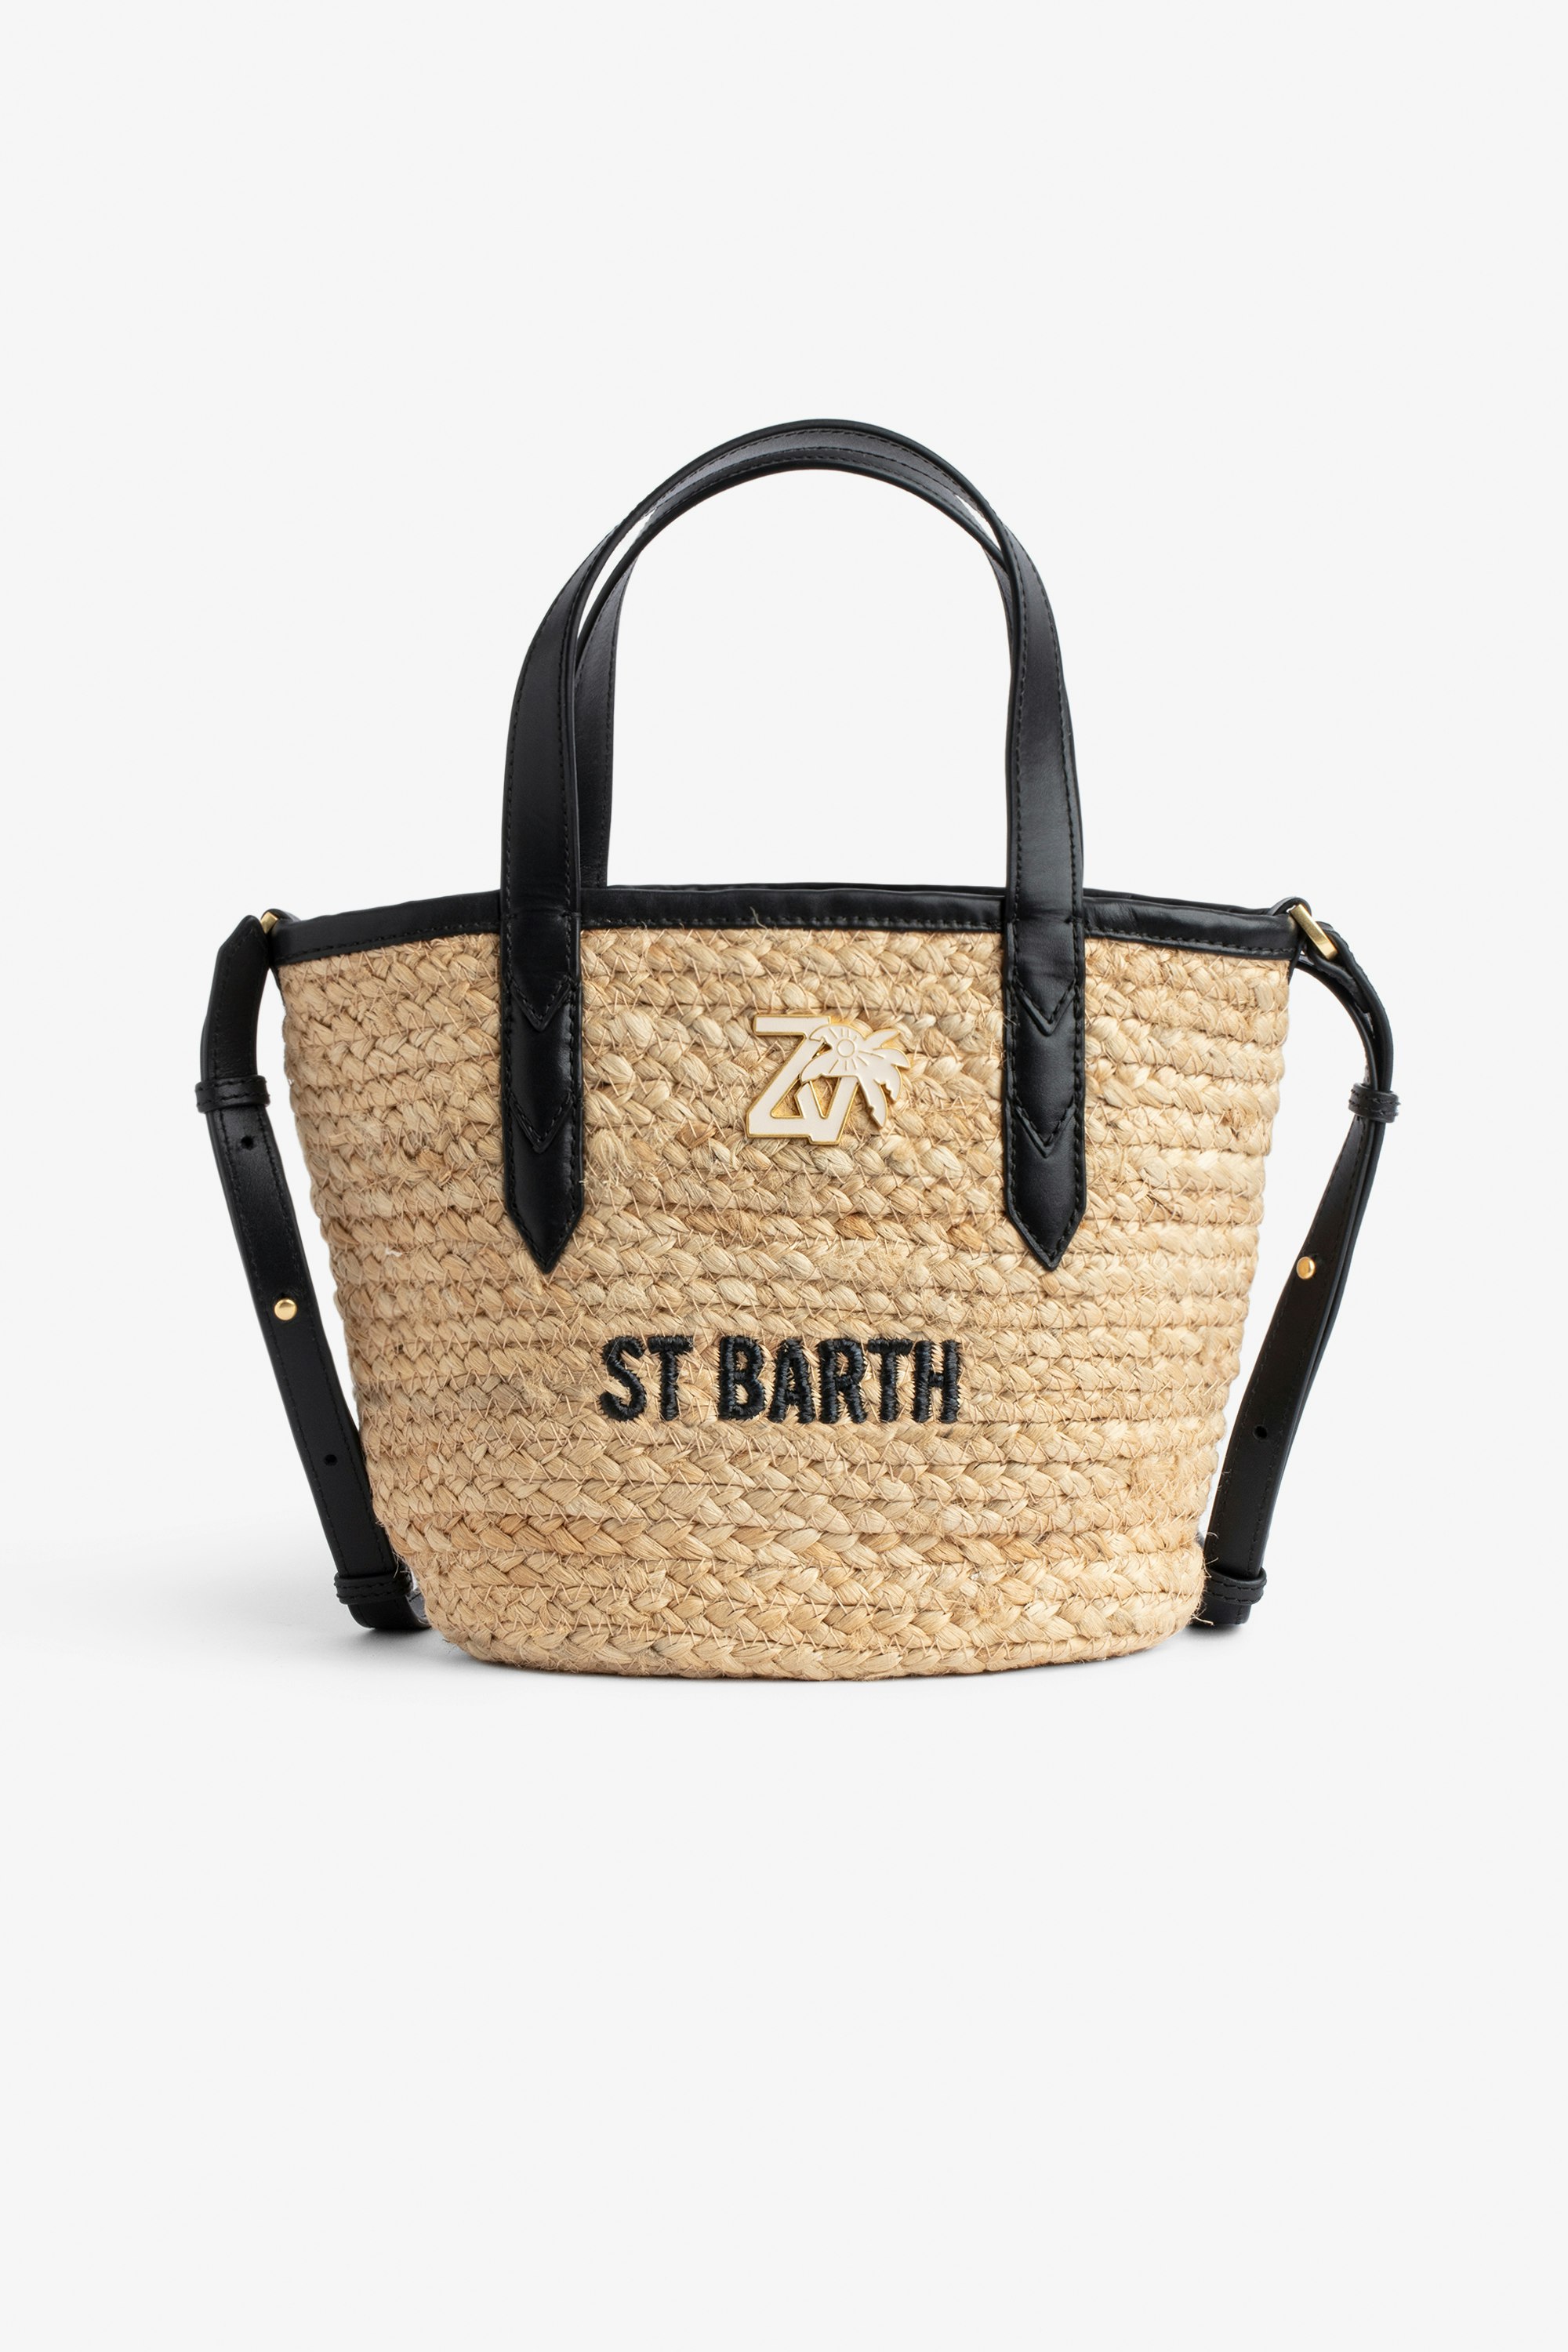 Le Baby Beach Bag Women's straw bag with black leather shoulder strap, "St Barth" embroidery and ZV charm